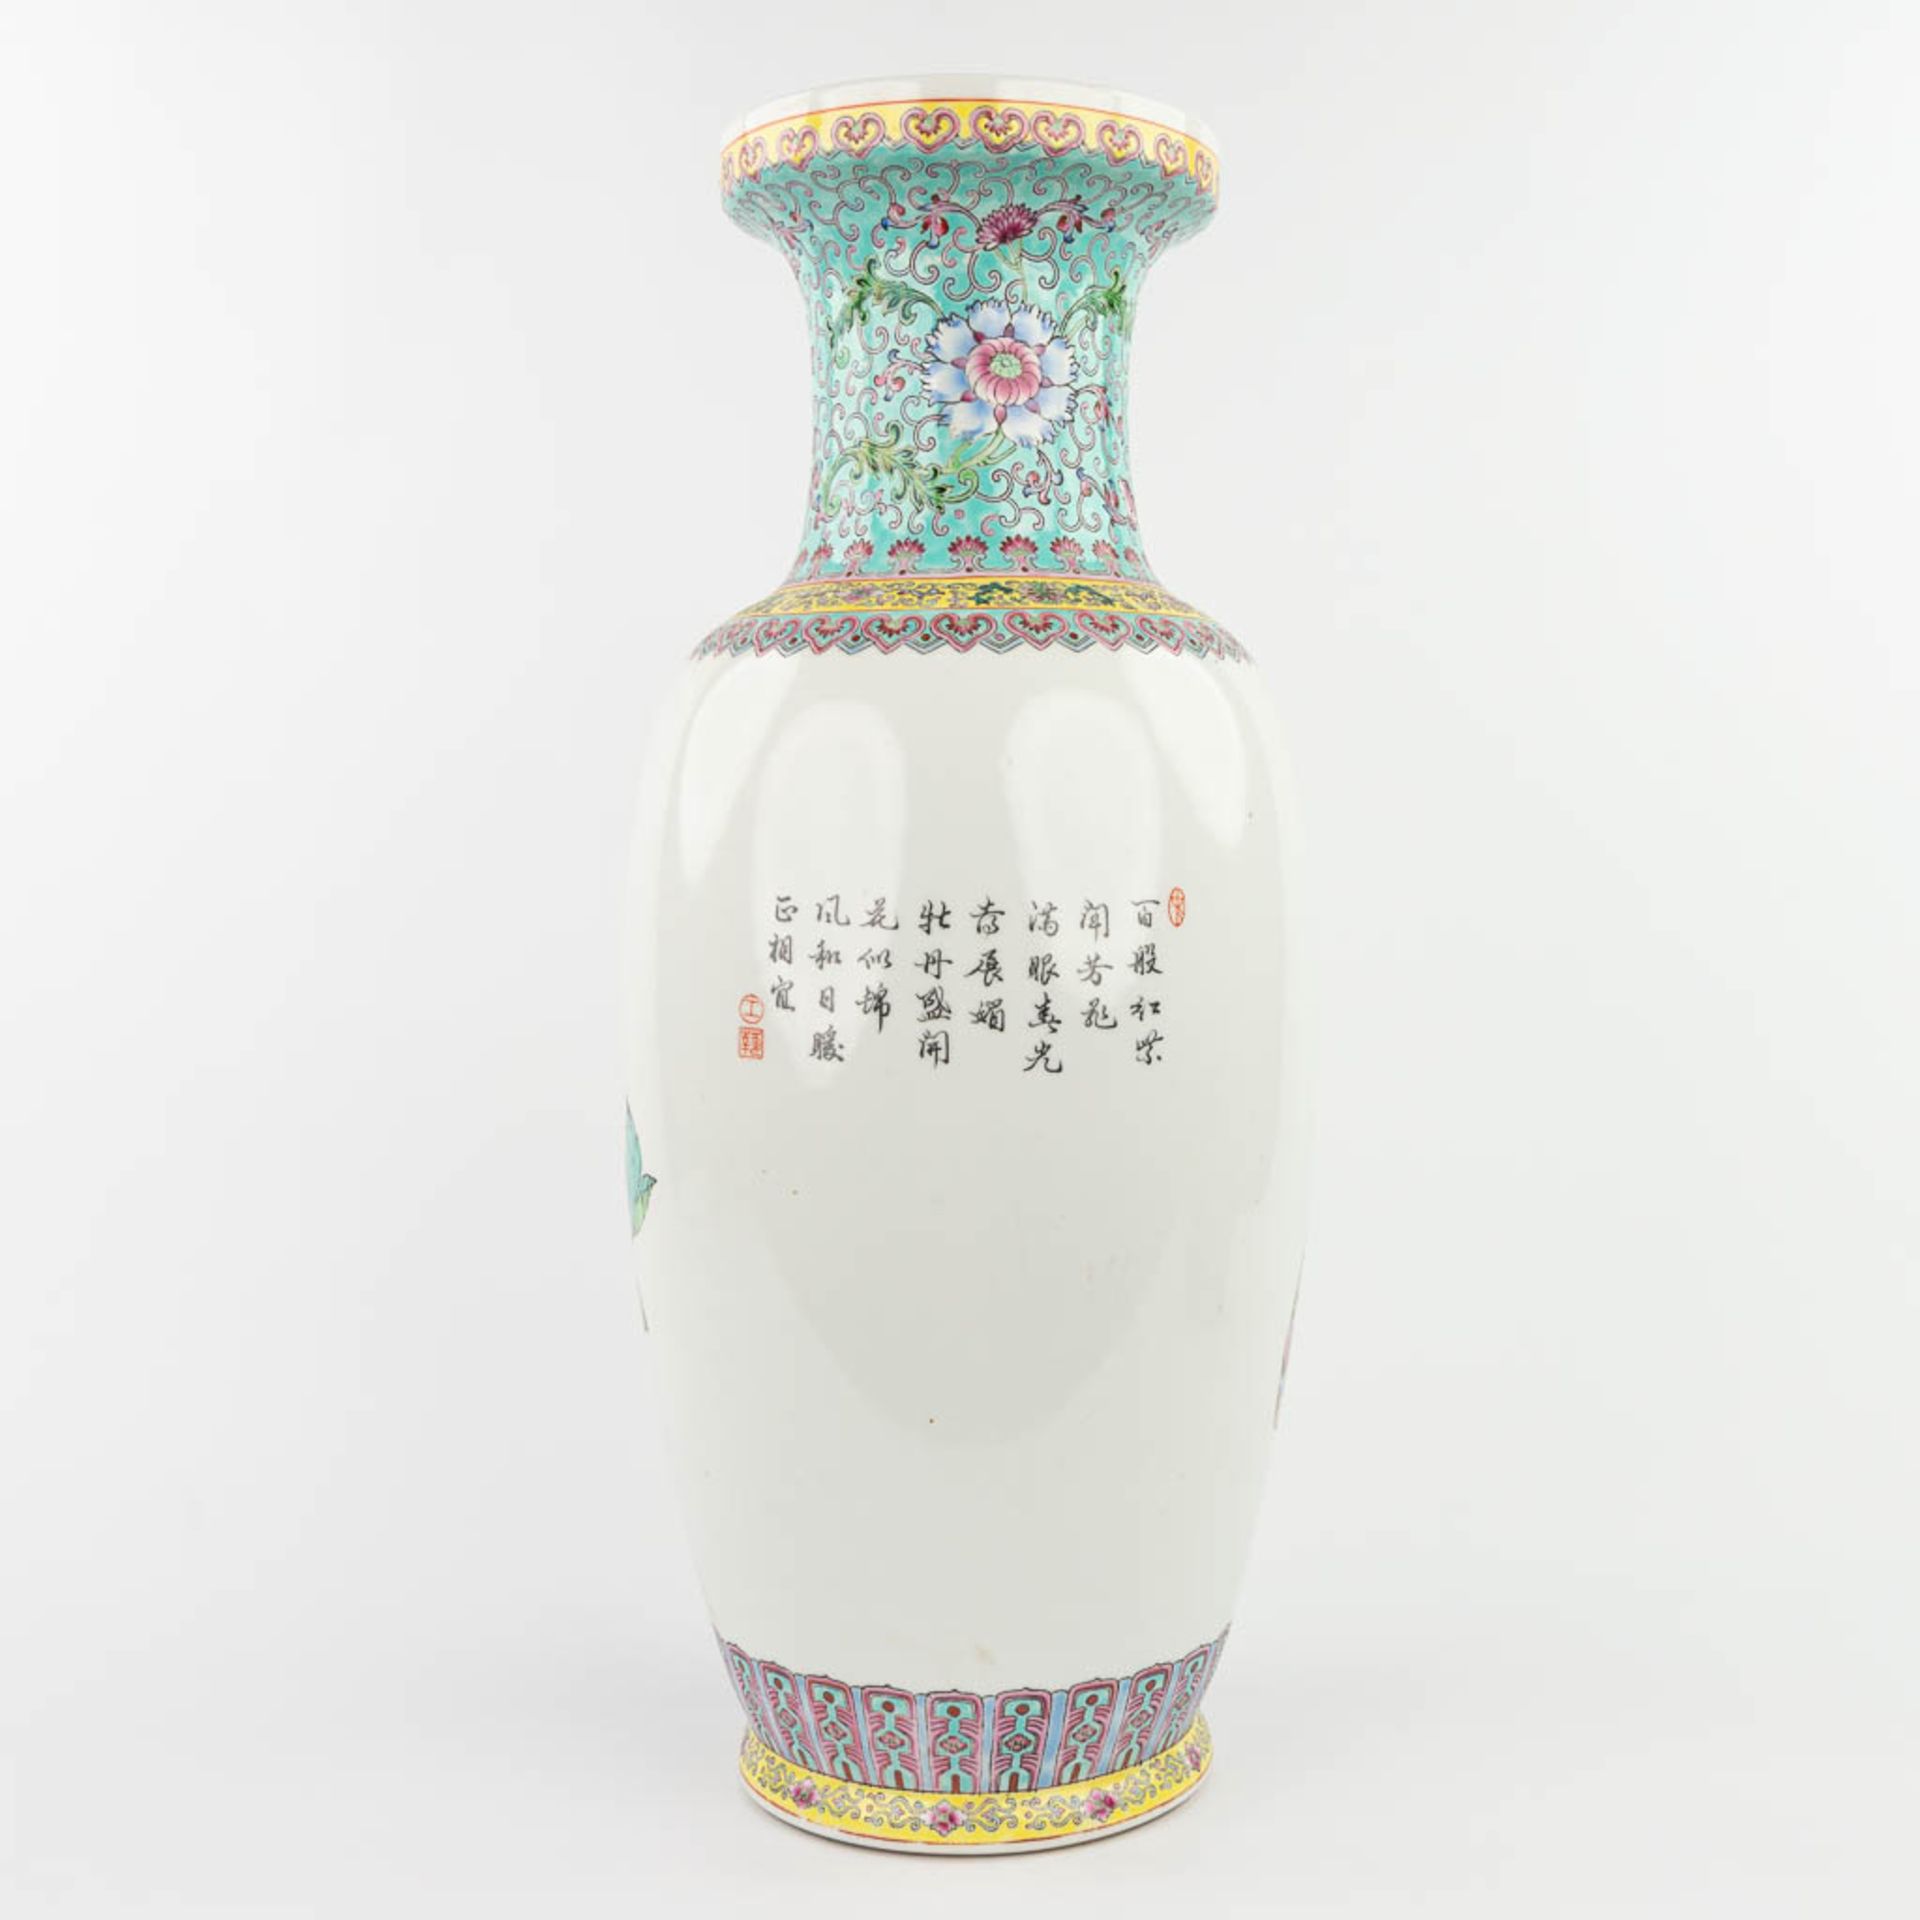 A Chinese vase made of porcelain and decorated with peacocks. 20th C. (60,5 x 23,5 cm) - Image 2 of 12